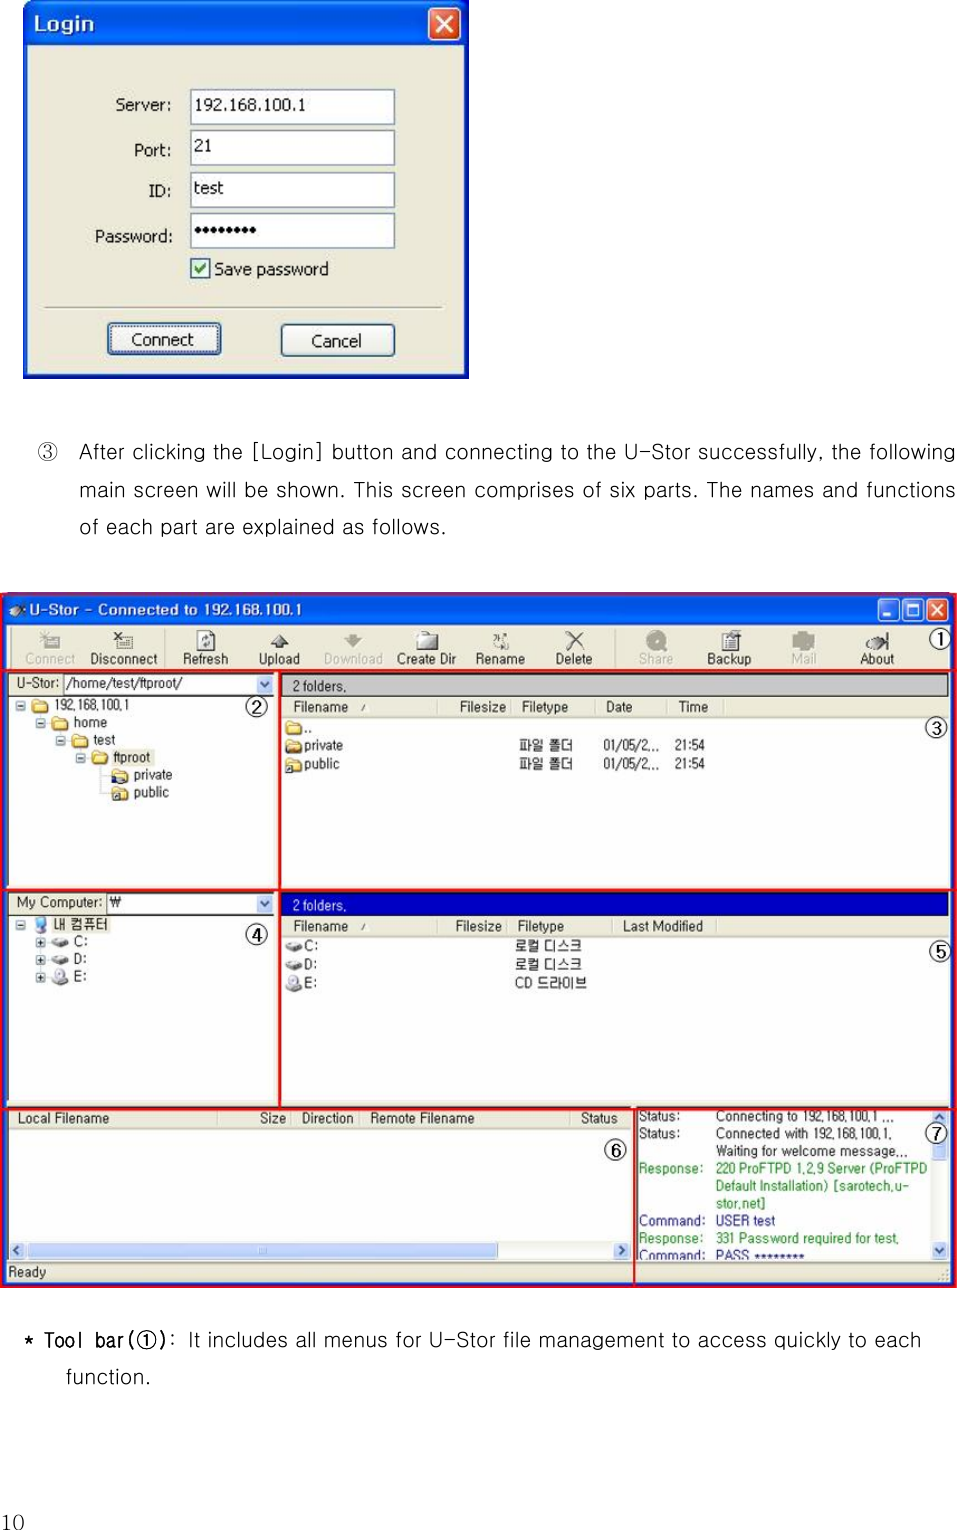 10   ③  After clicking the [Login] button and connecting to the U-Stor successfully, the following main screen will be shown. This screen comprises of six parts. The names and functions of each part are explained as follows.  * Tool bar(①): It includes all menus for U-Stor file management to access quickly to each function. 